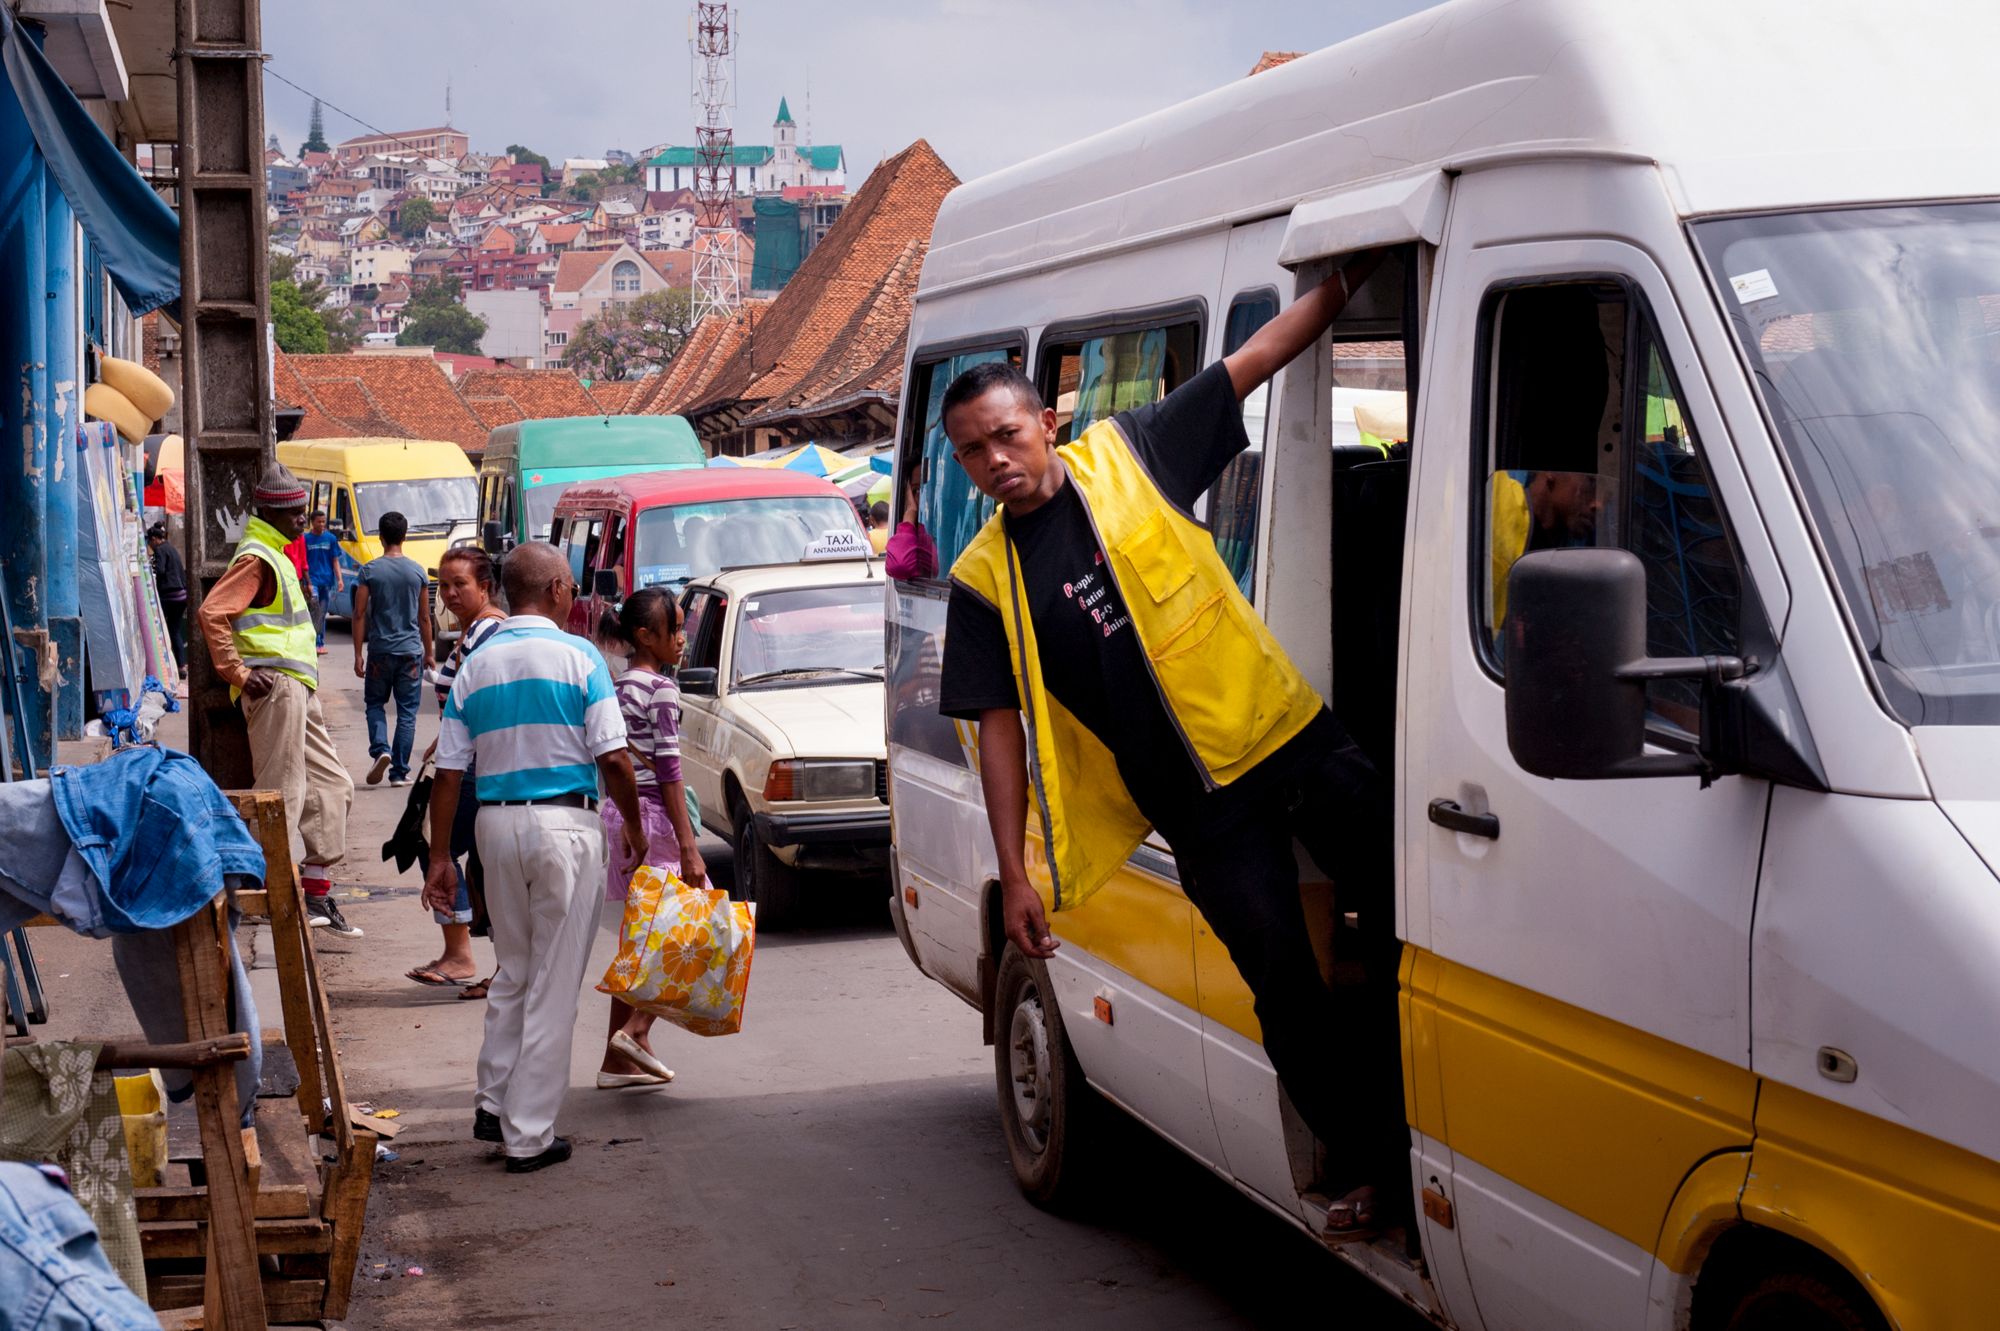 Analakely — Antananarivo's main market — is a packed, teeming place, selling clothes, household items, pirated DVDs and every food one can imagine. (Photo: Arne Hoel)